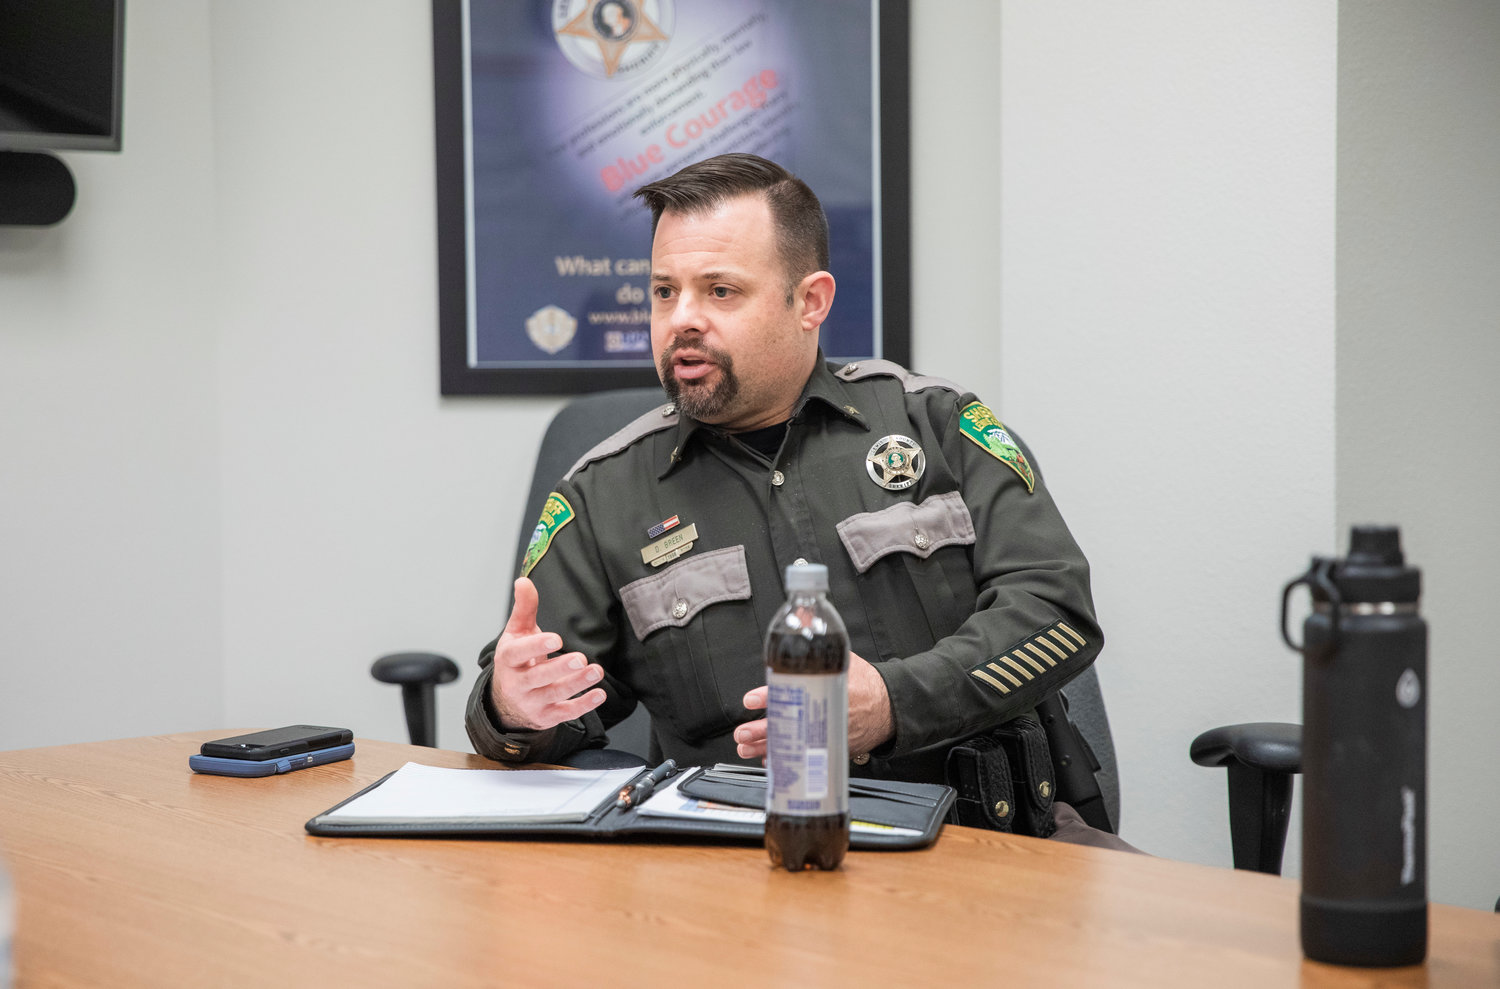 Lewis County Sheriff’s Office Field Operations Chief Dusty Breen describes his role as a public information officer during a Wednesday interview in Chehalis.